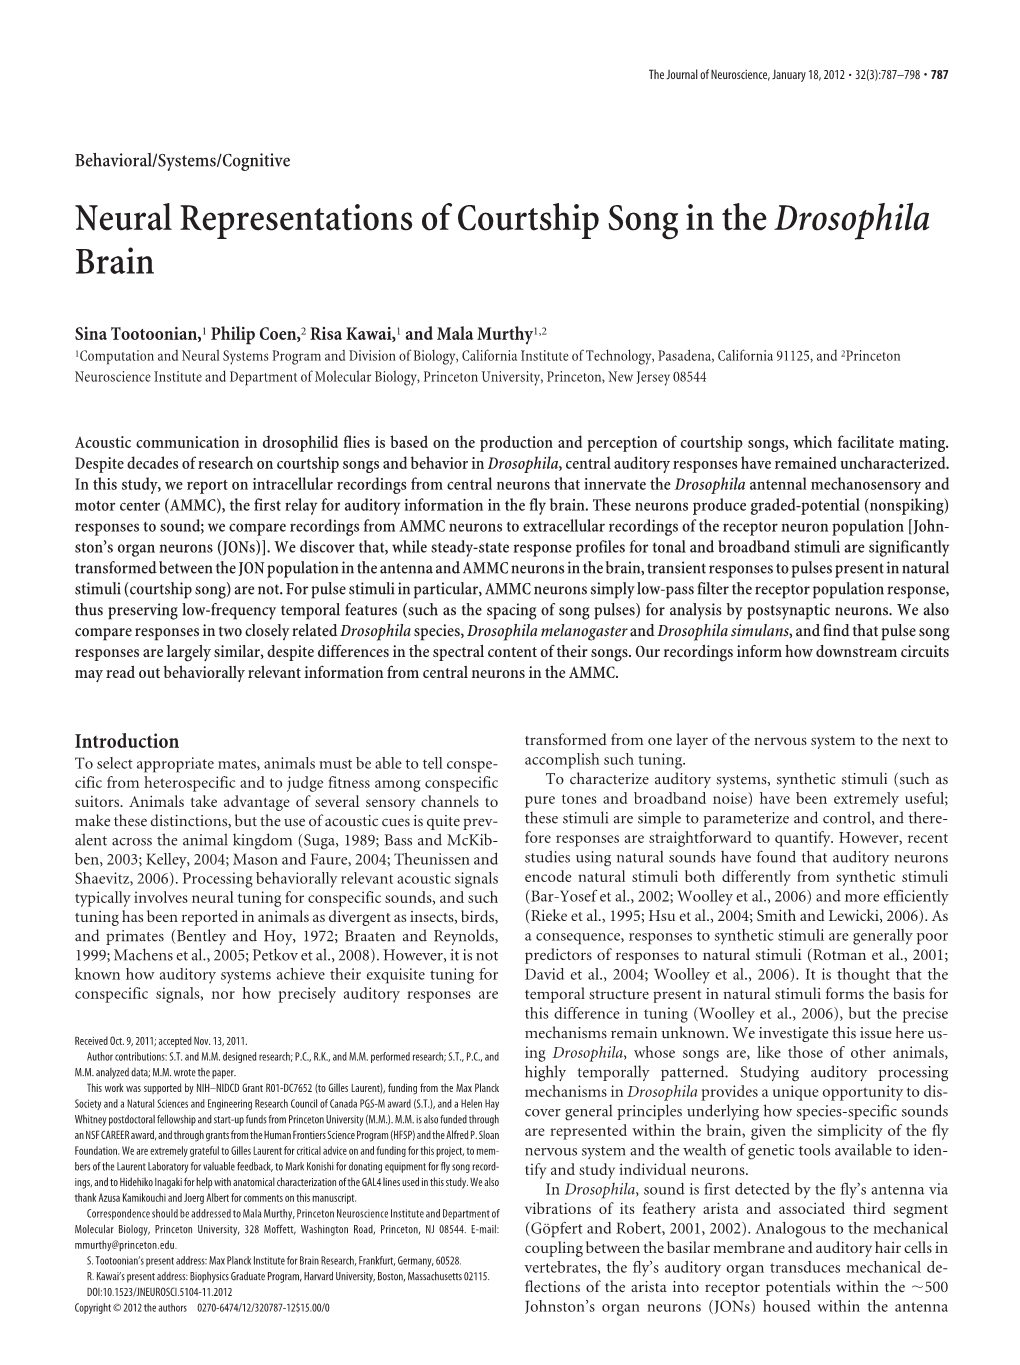 Neural Representations of Courtship Song in Thedrosophila Brain